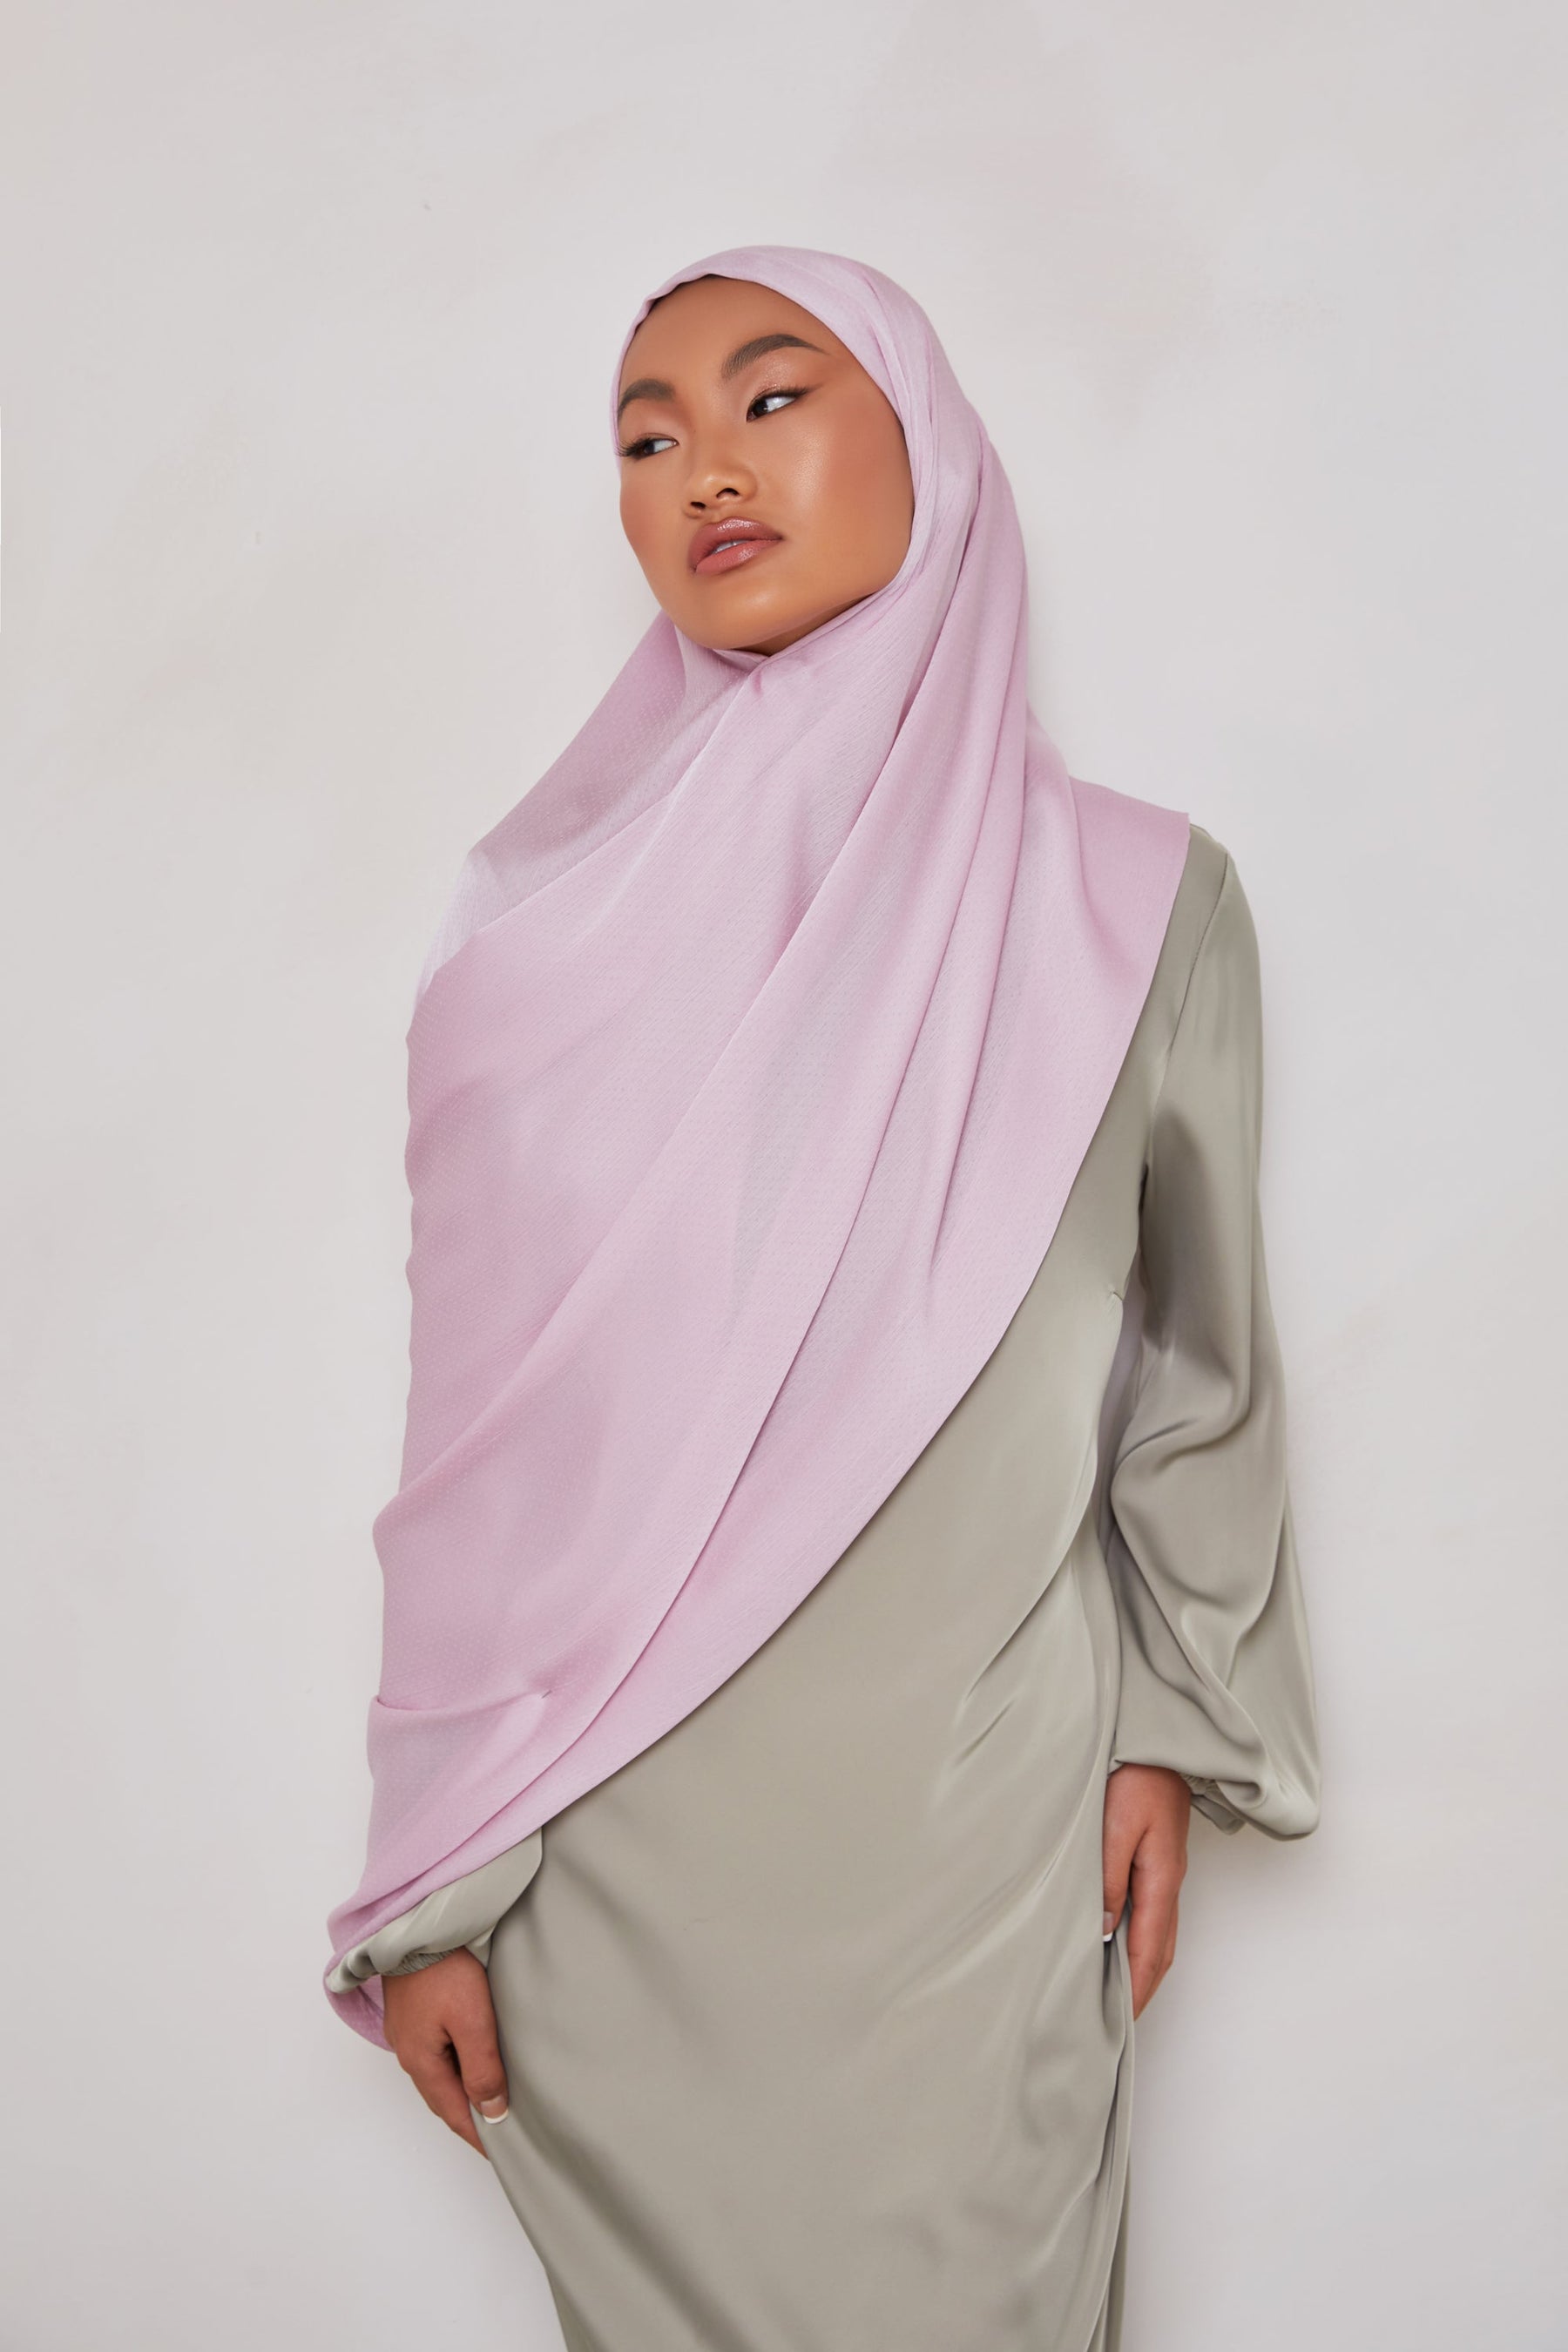 TEXTURE Crepe Hijab - Pink Dots Veiled Collection 